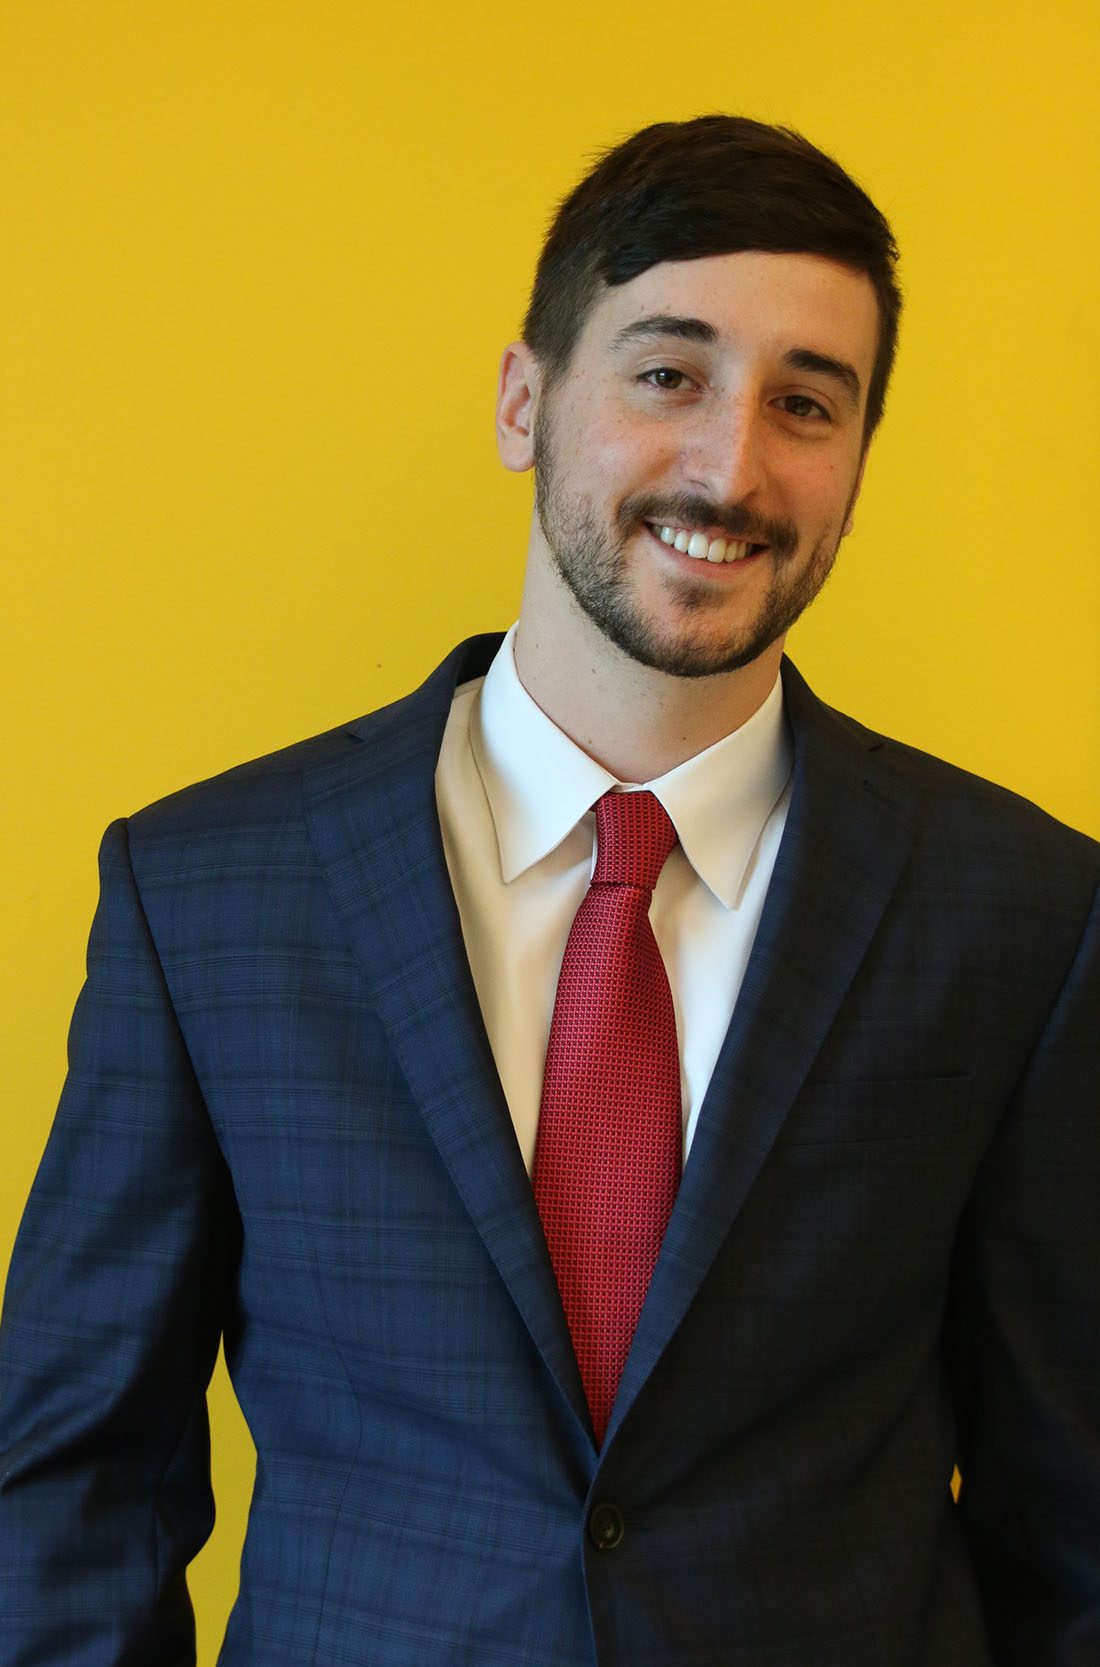 Jordan Mazurek is a young, white man with black side-swept hair and facial hair. He stands, smiling, against a yellow background wearing a navy suit jacket, white button up, and red tie.